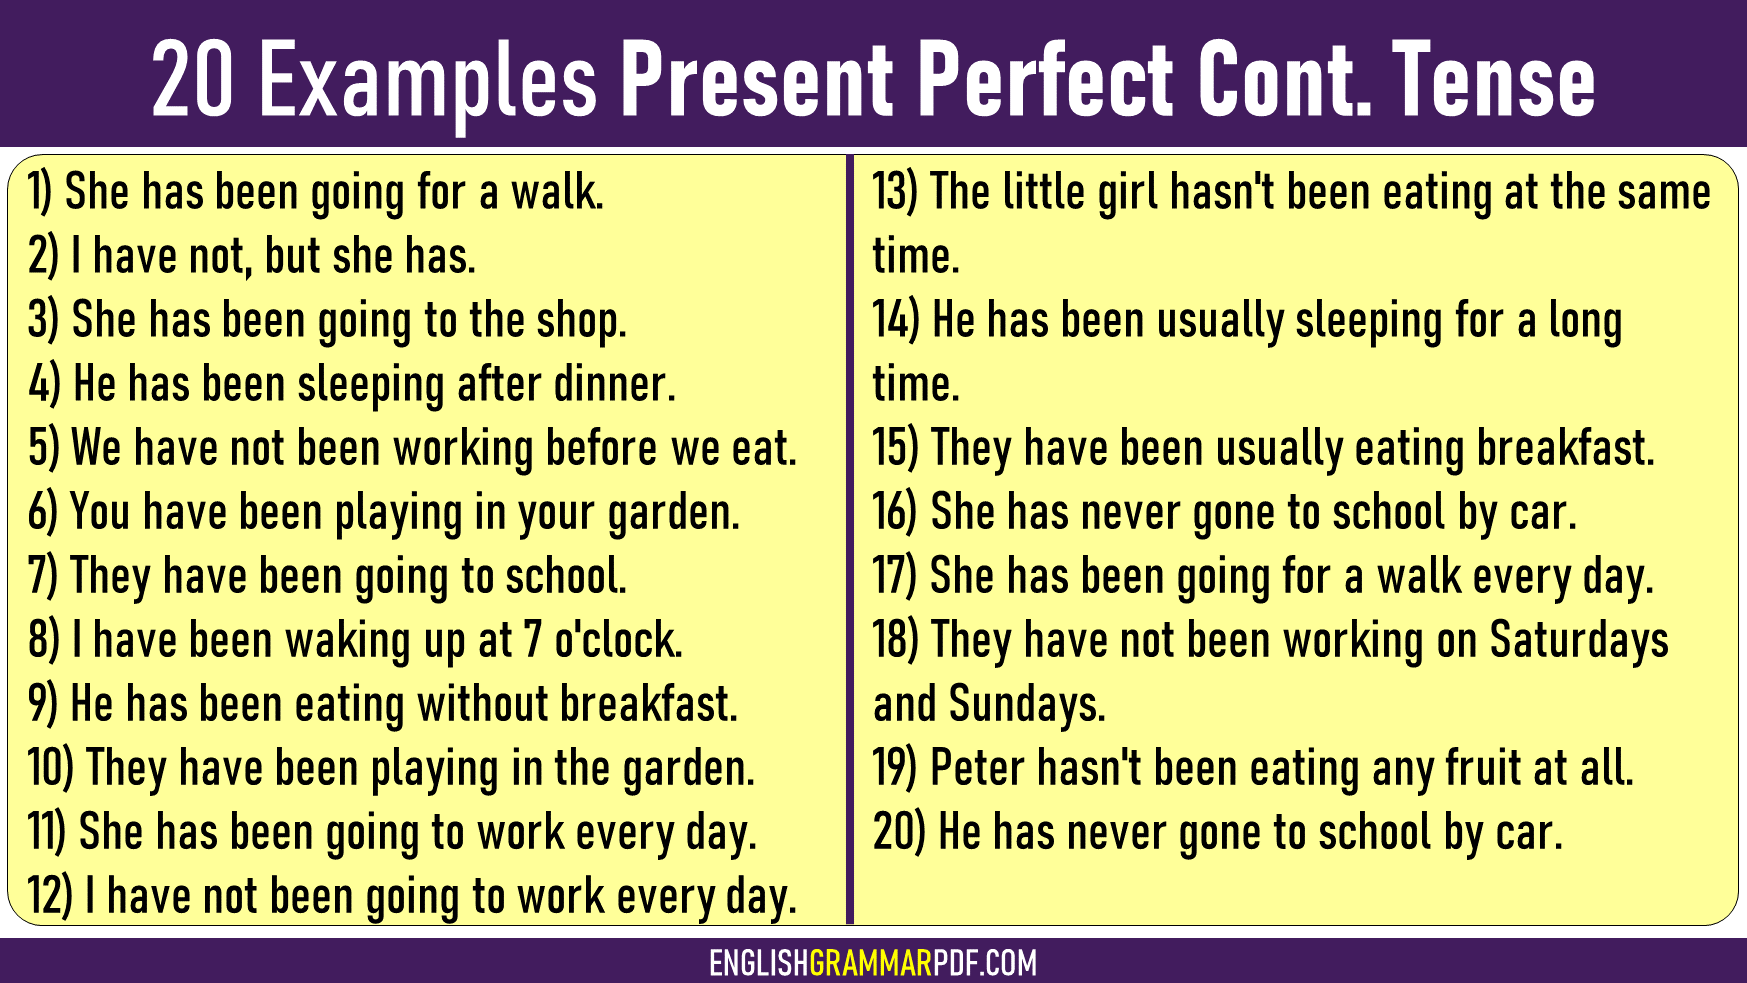 20-examples-of-present-perfect-continuous-tense-english-grammar-pdf